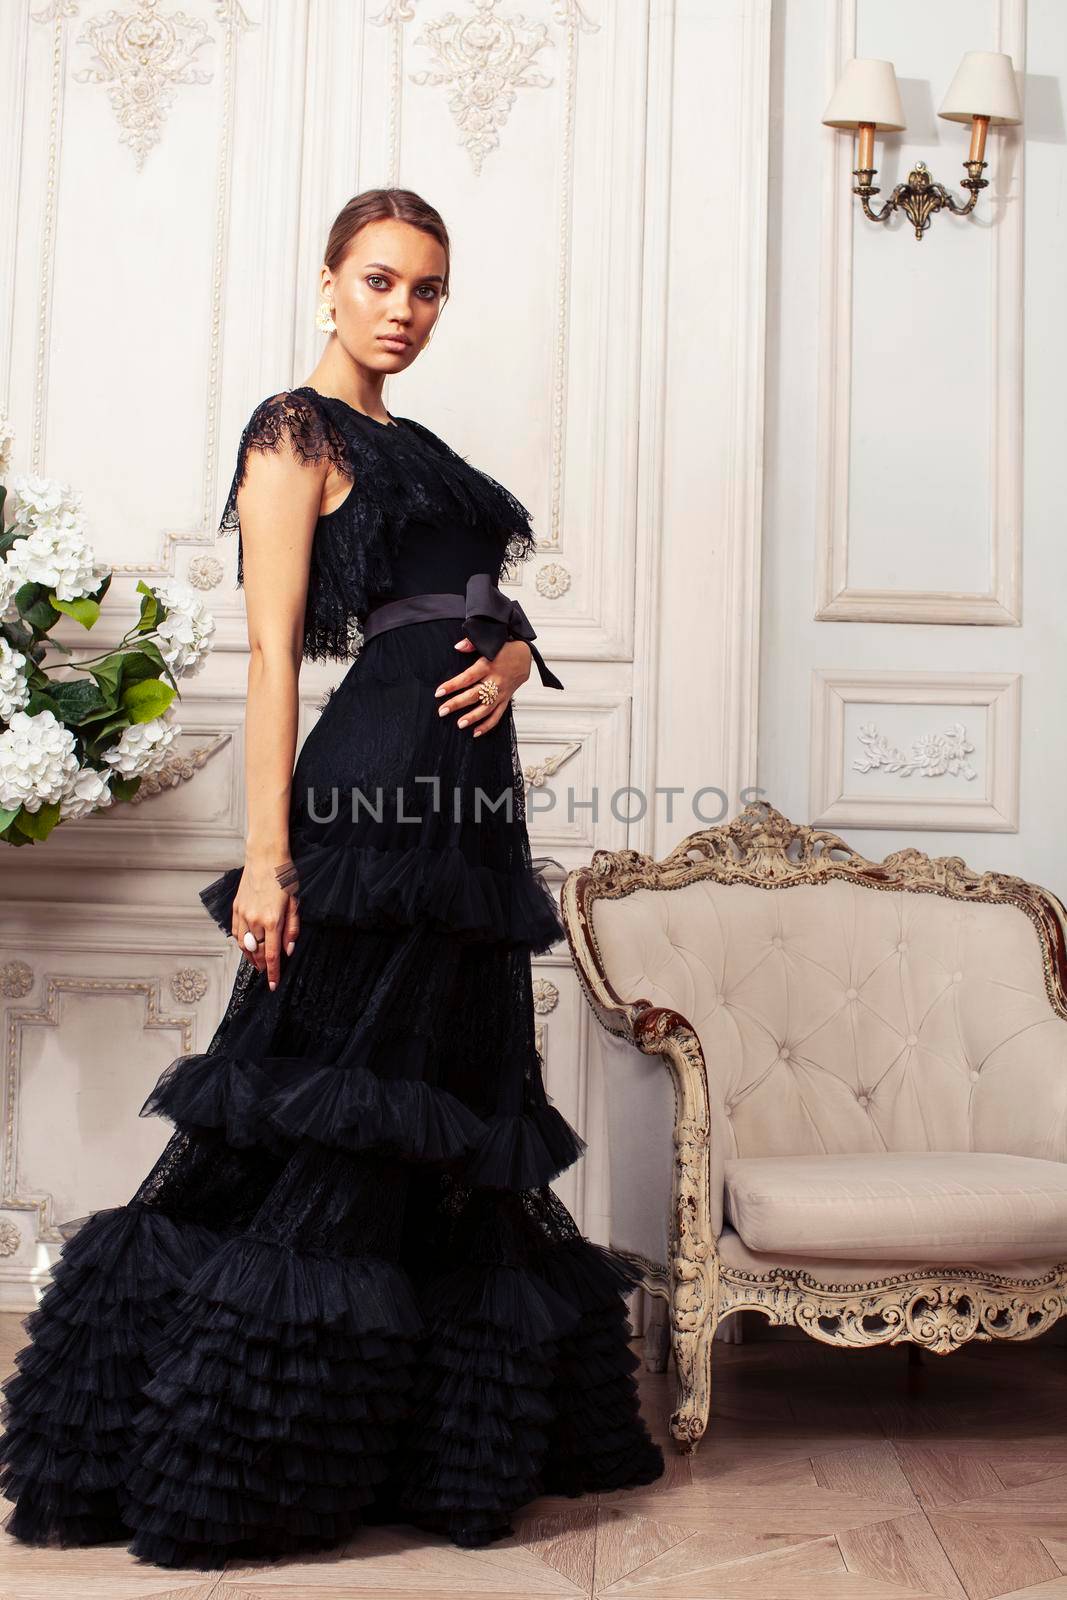 young pretty lady in black lace fashion style dress posing in rich interior of royal hotel room, luxury lifestyle people concept by JordanJ